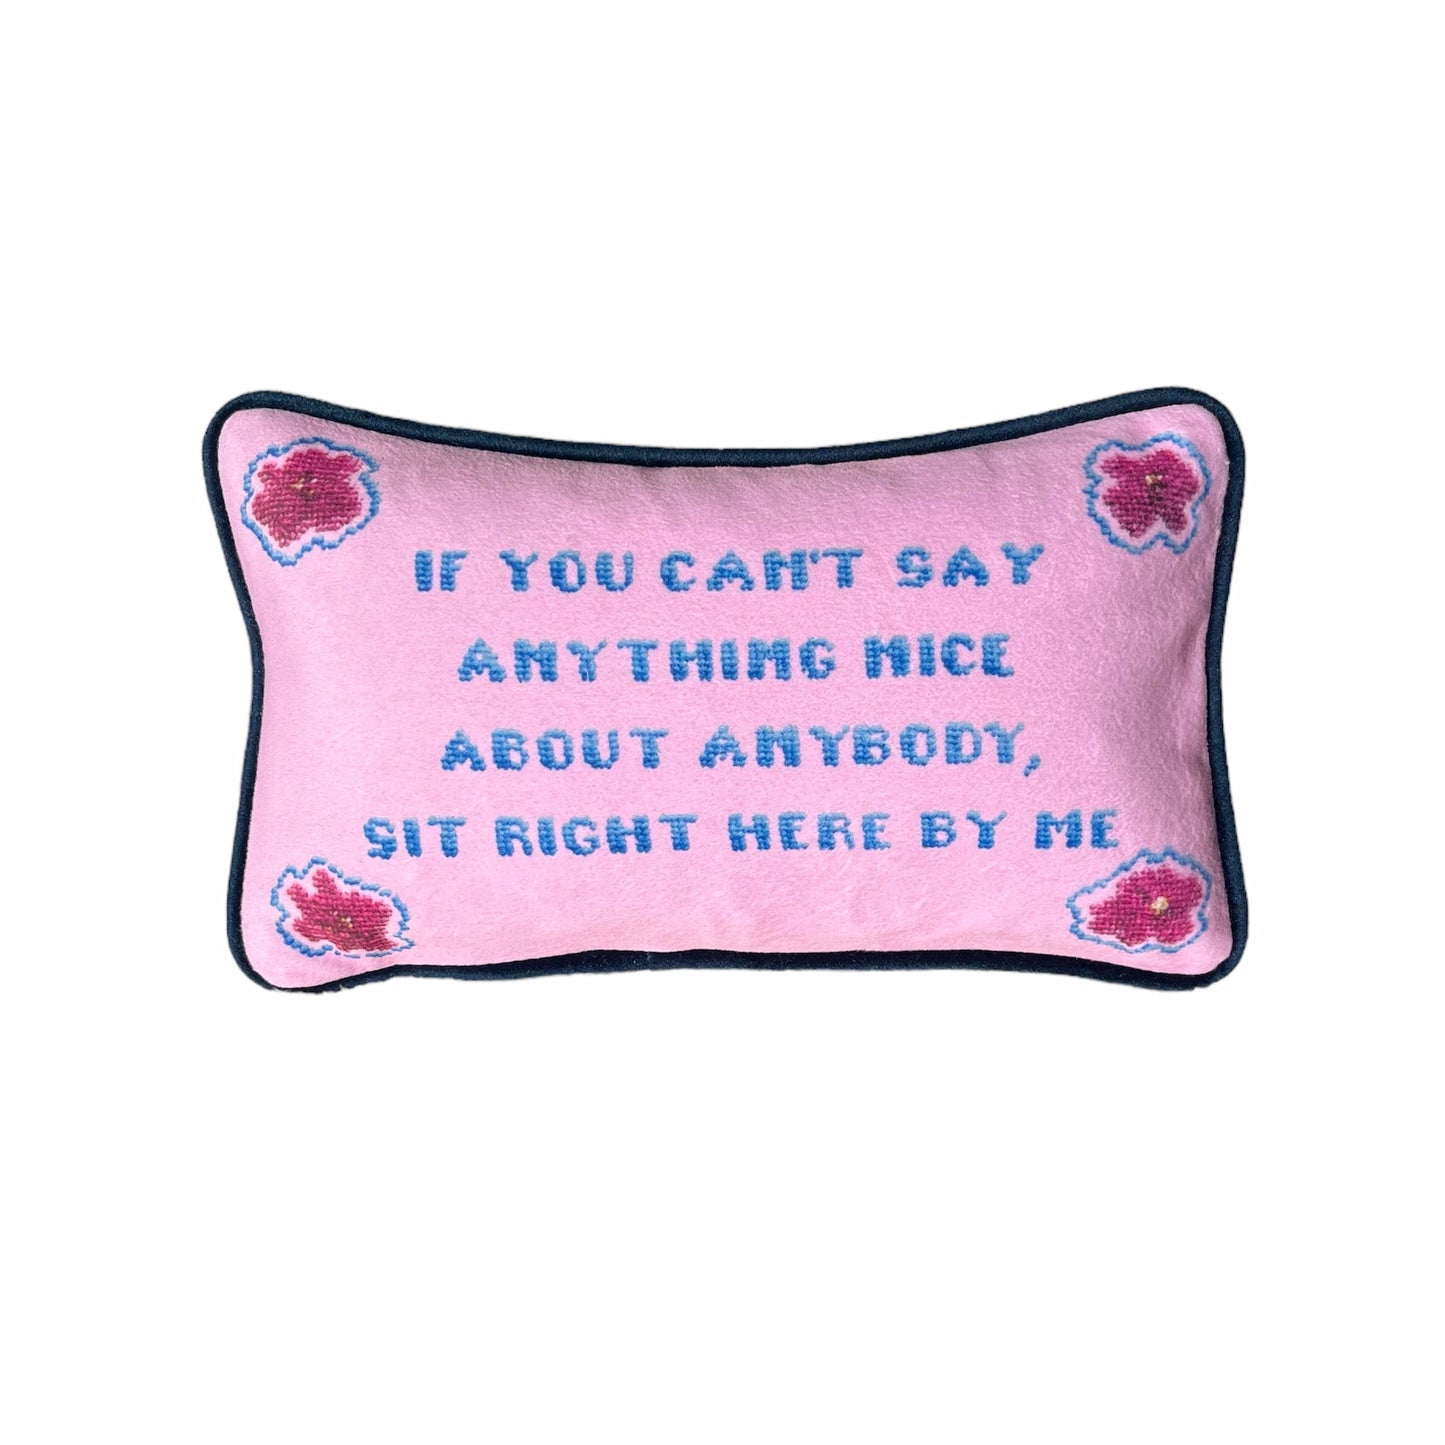 "If you can't say anything nice about anybody, sit right here by my" pillow with pink flowers in the corners and pinkbackground.